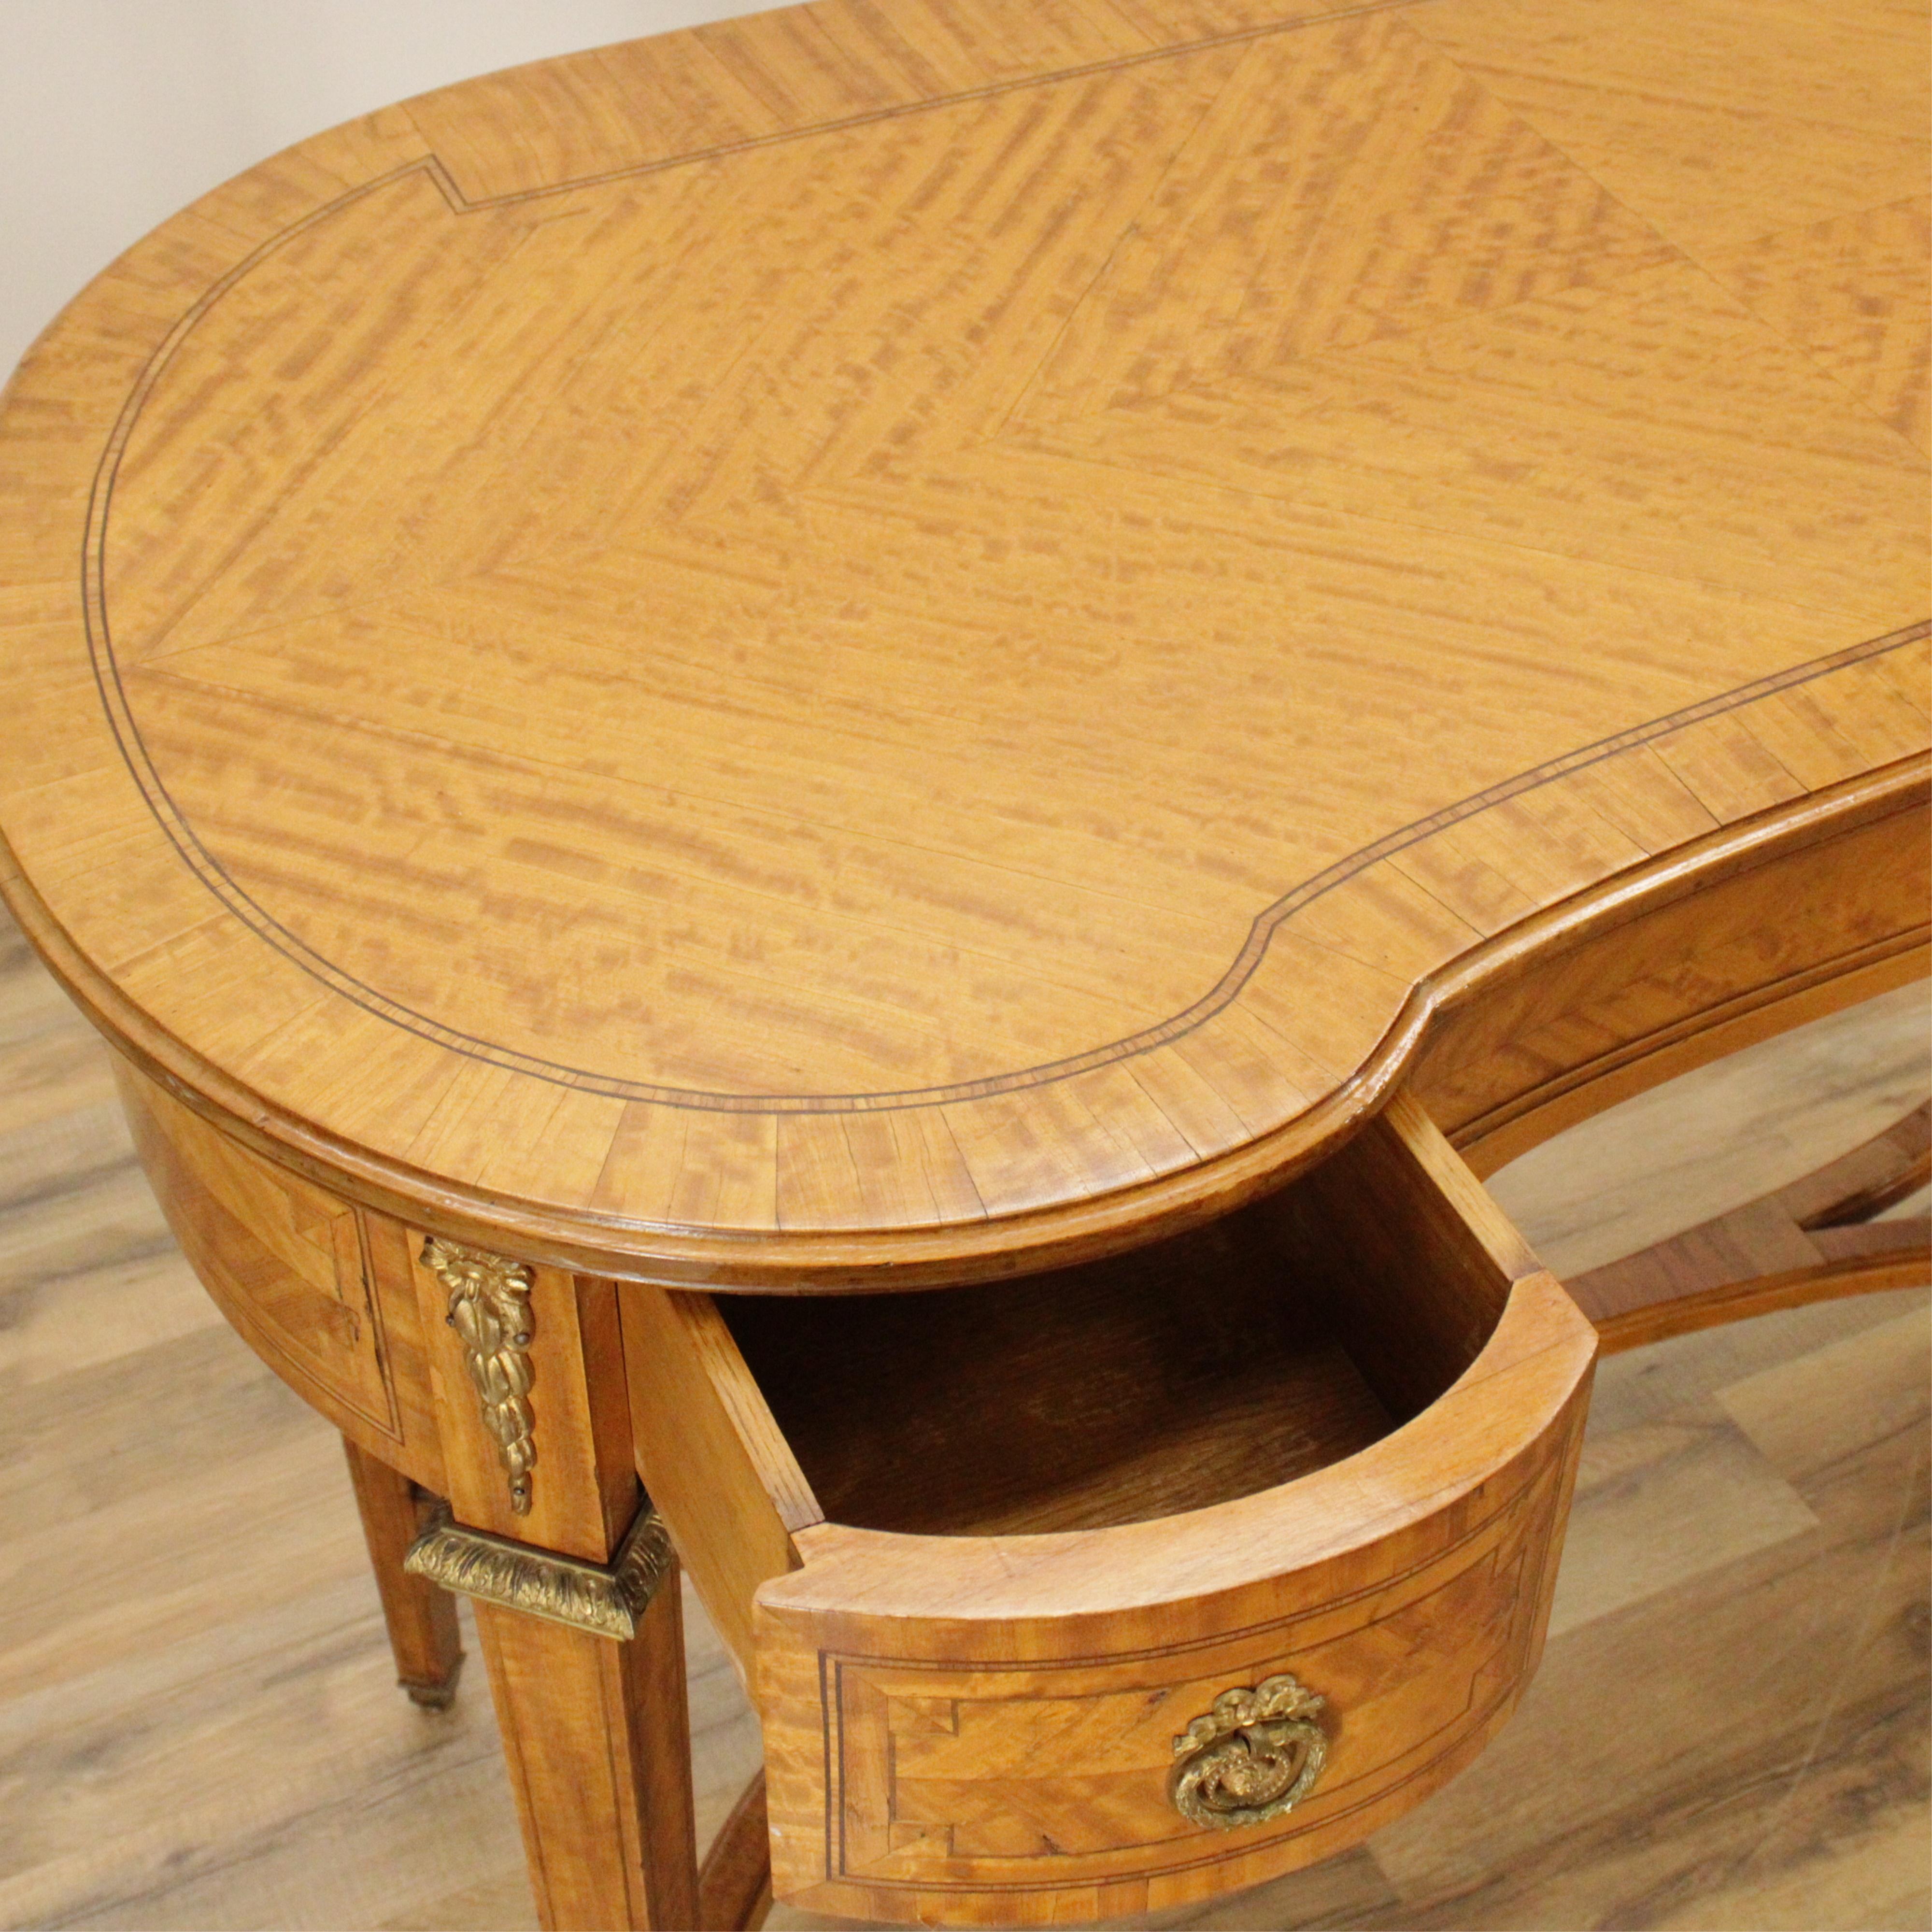 George III style satinwood dressing table or desk with kidney form, large middle drawer and two small side drawers with stretcher base. 
Measures: 30.5